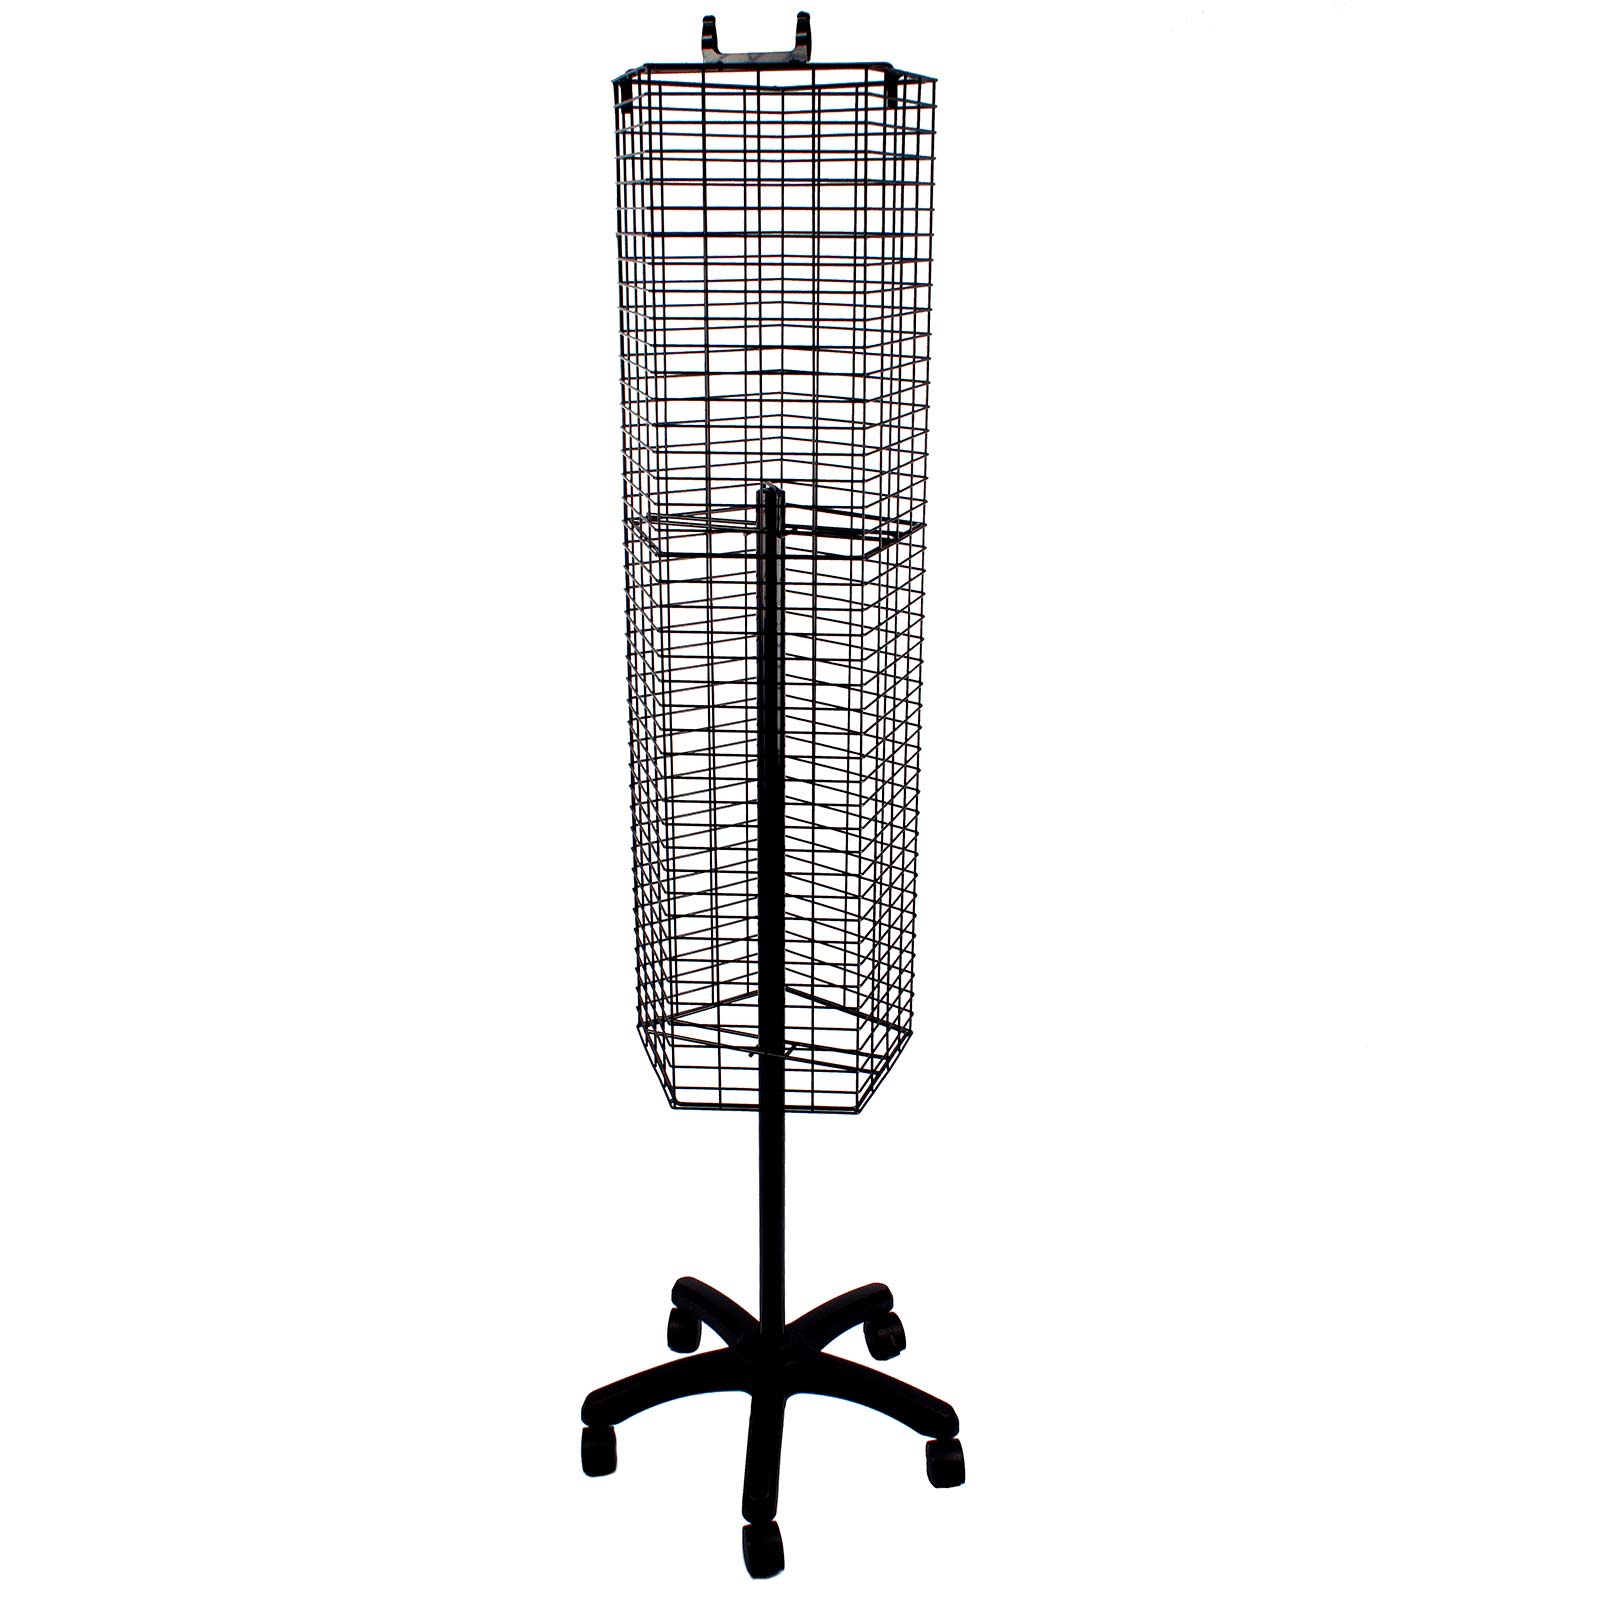 K27B - 5 Sided Rotary Mesh Stand in Black